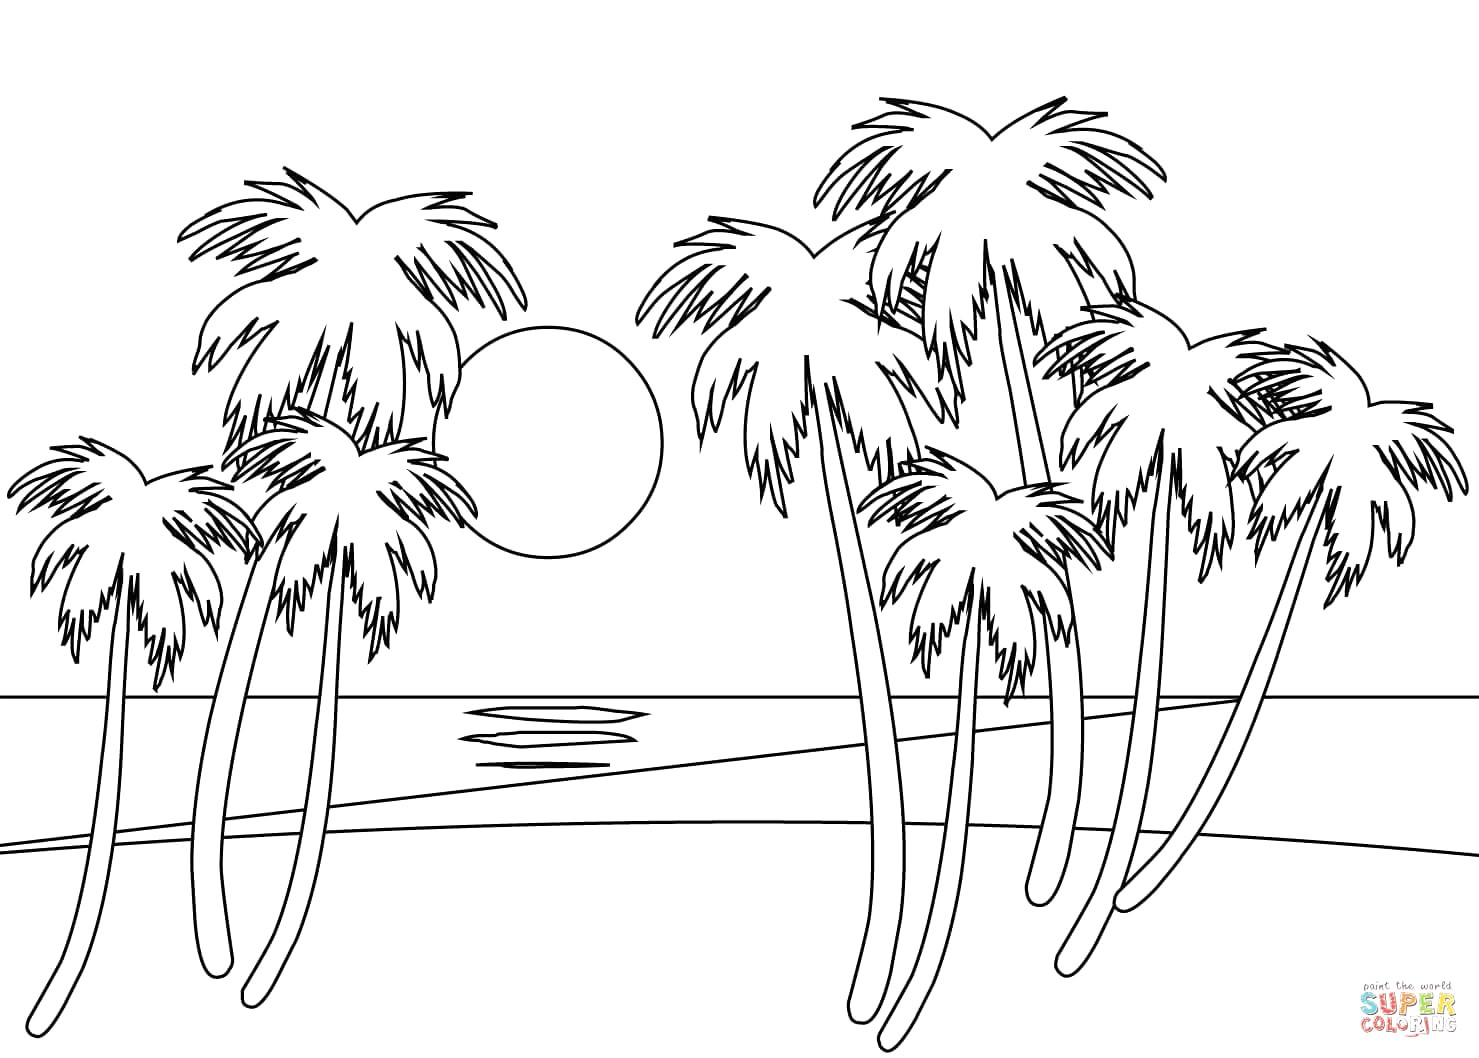 Sunset Coloring Pages at GetDrawings.com | Free for personal ...